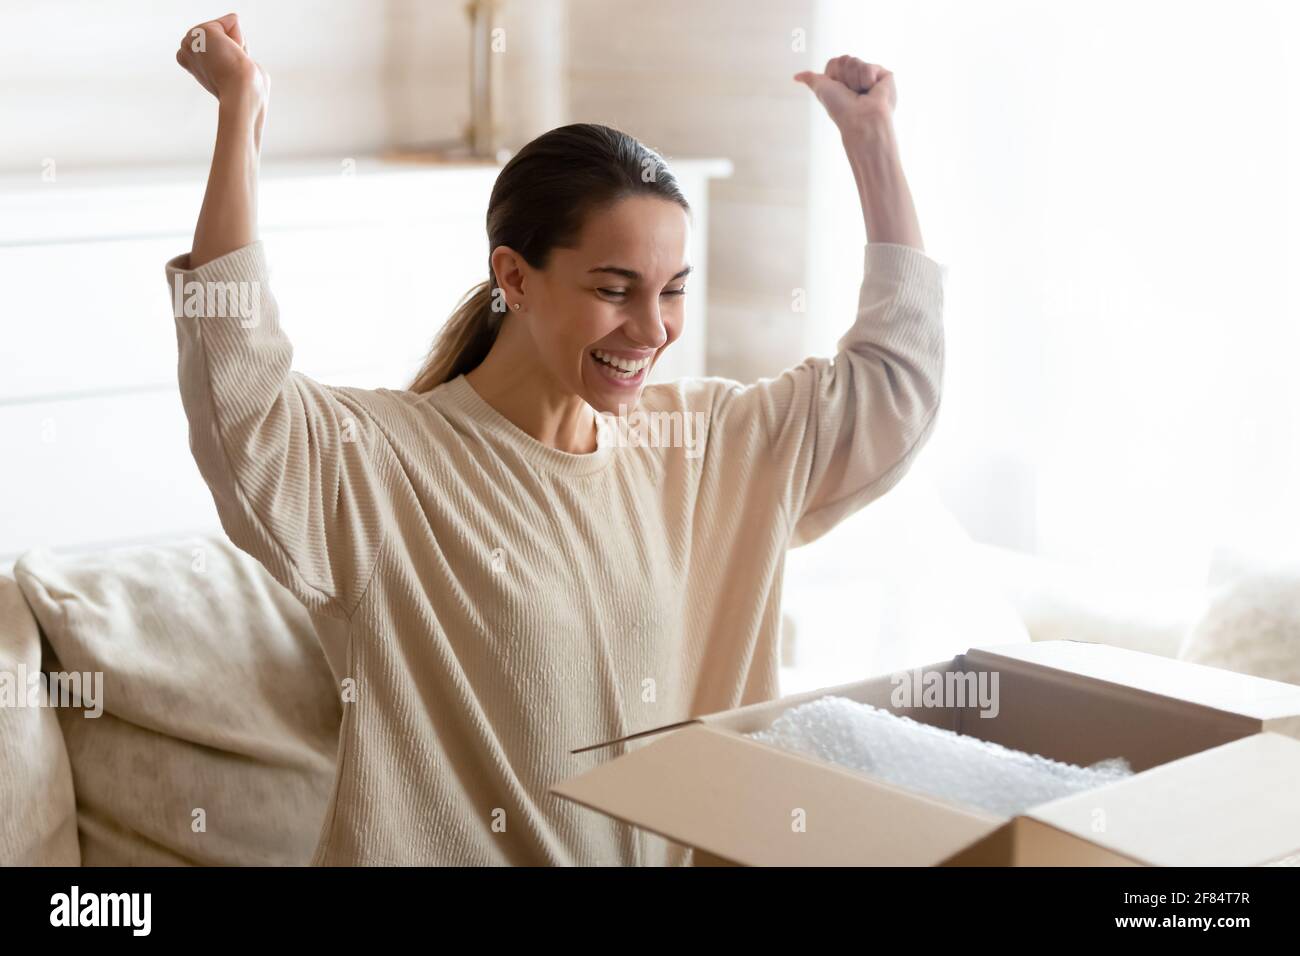 Overjoyed female buyer excited with online order Stock Photo